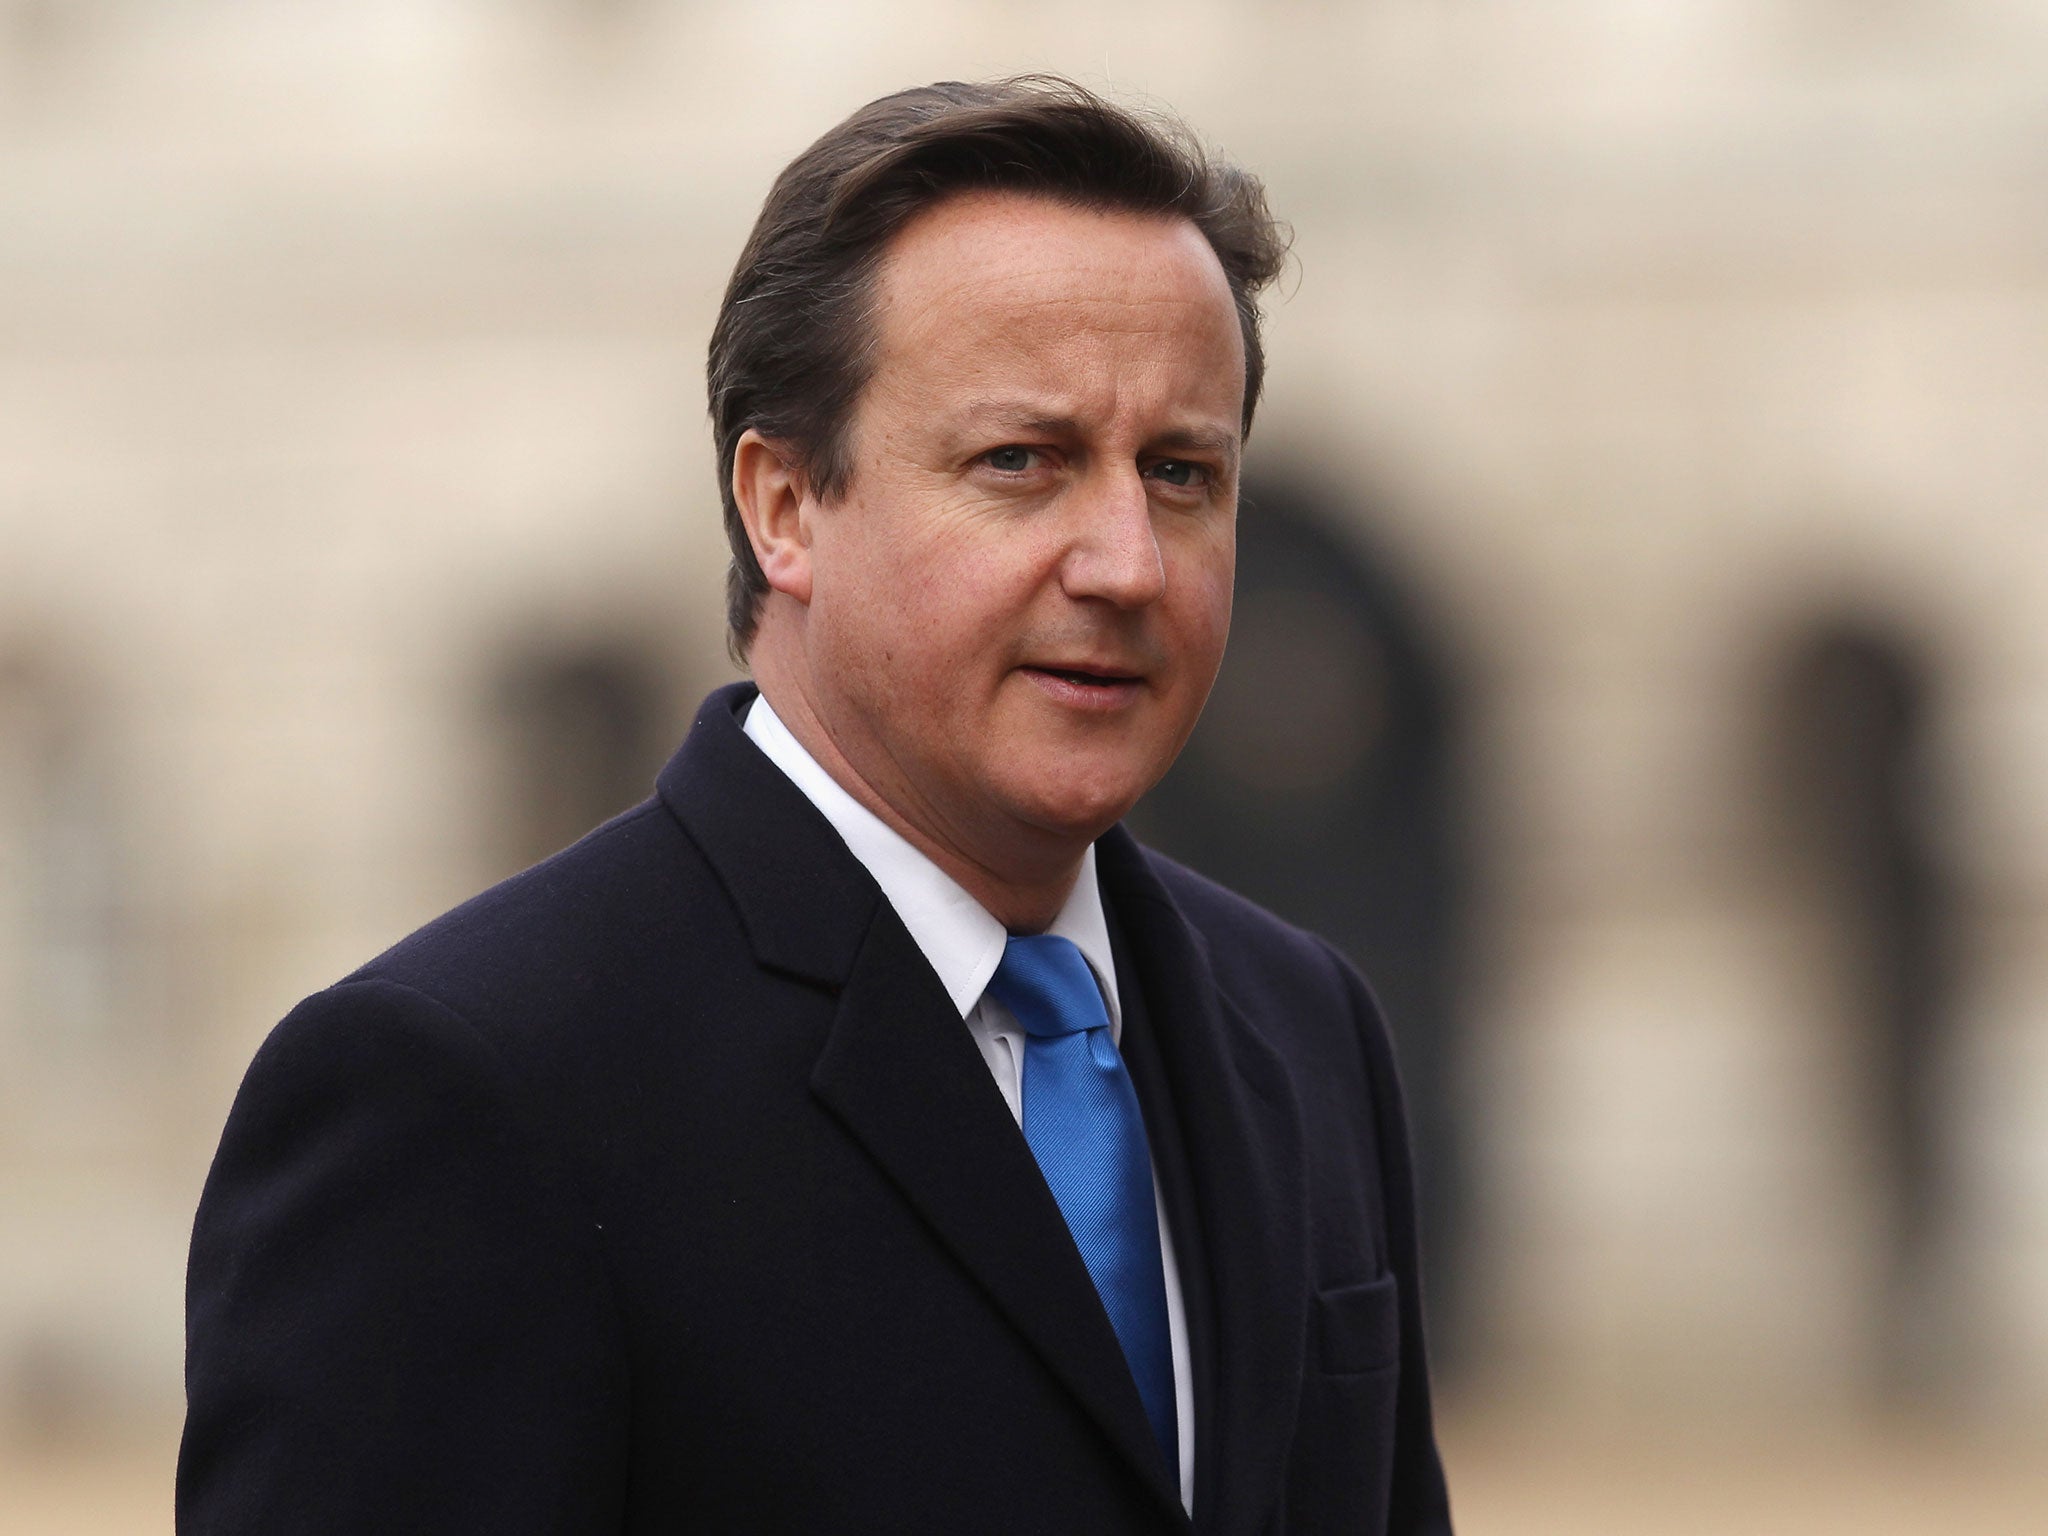 David Cameron promises sweeping changes to end the ‘scandalous failure’ on reoffending rates